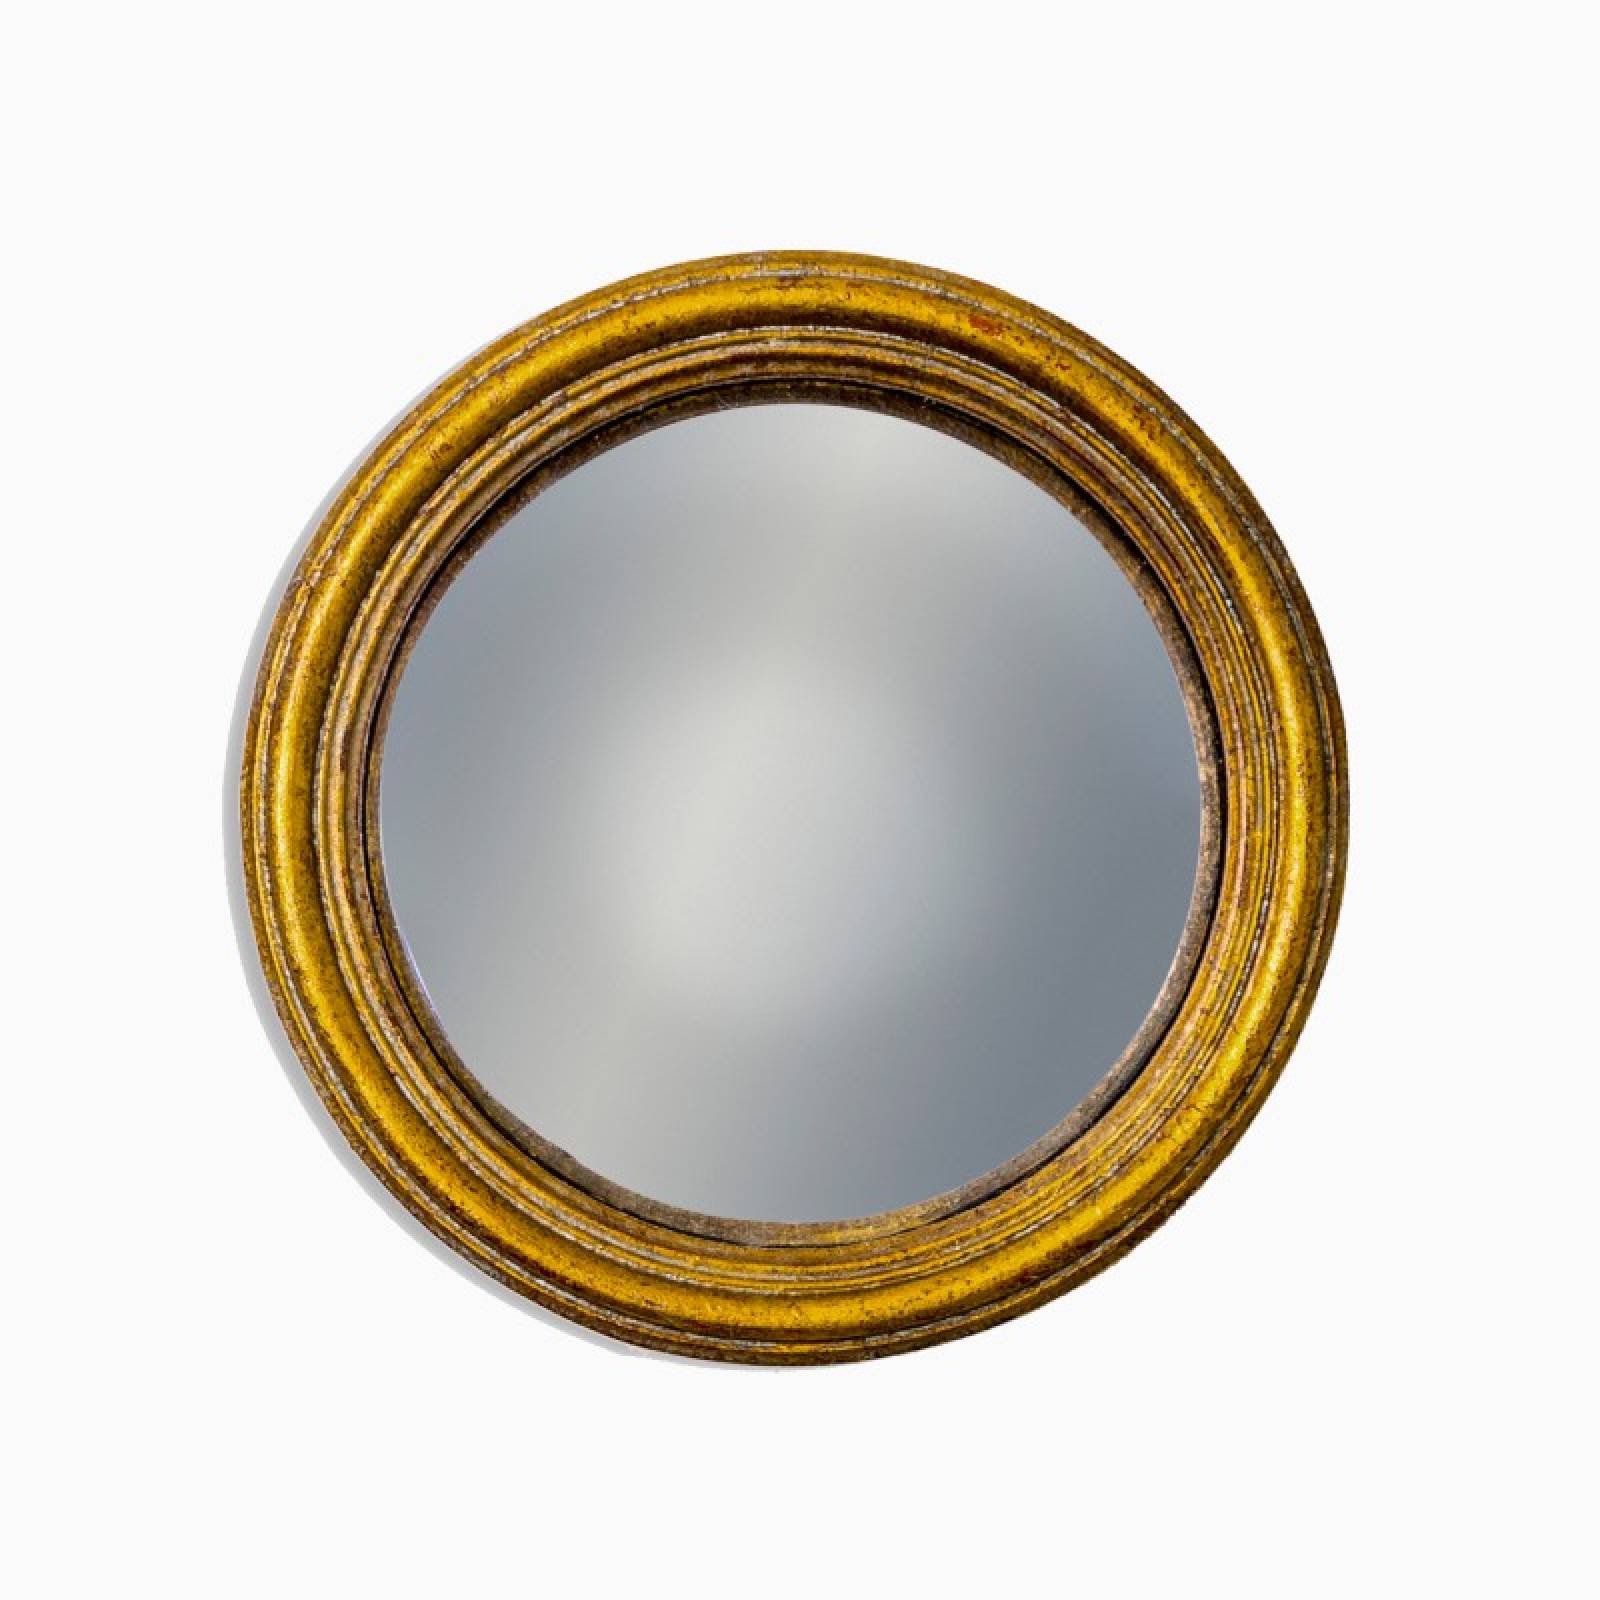 Small Antiqued Gold Thin Framed Convex Mirror D:13.5